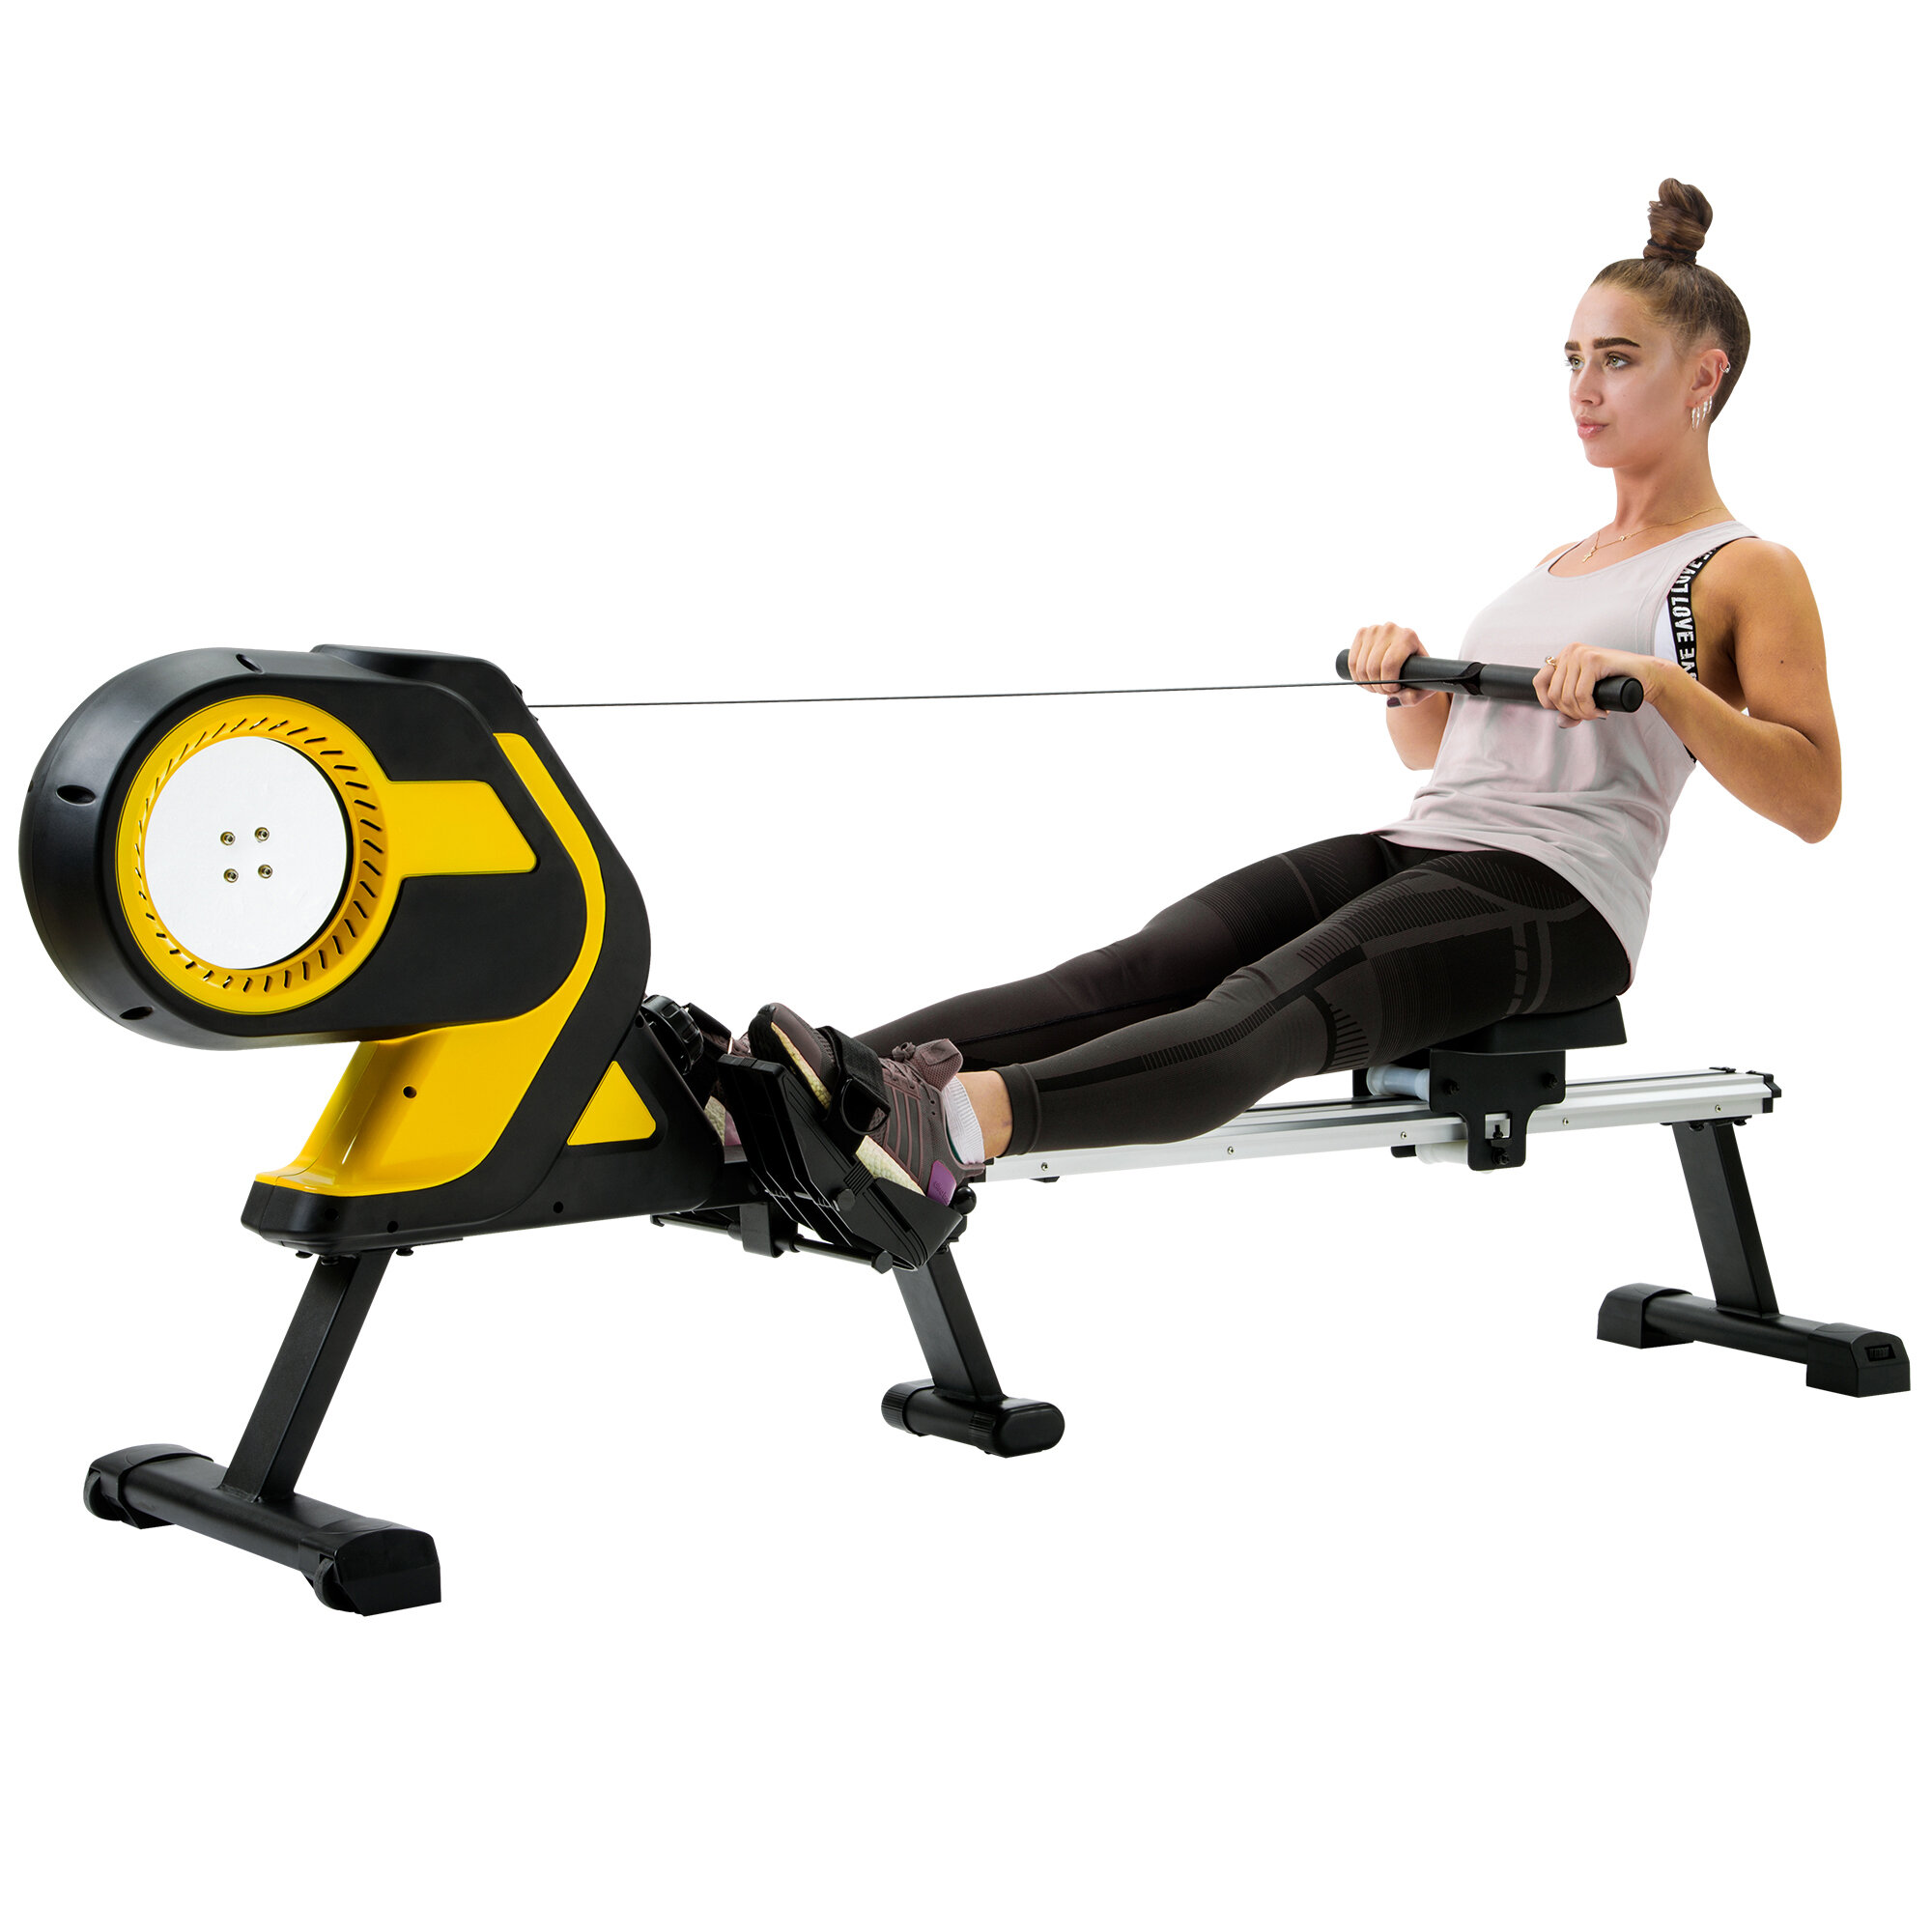 Image of [USA Direct] Bominfit Magnetic Rowing LCD Monitor 46" Slide Rail Folding Exercise Machine for Home Gym Cardio Workout